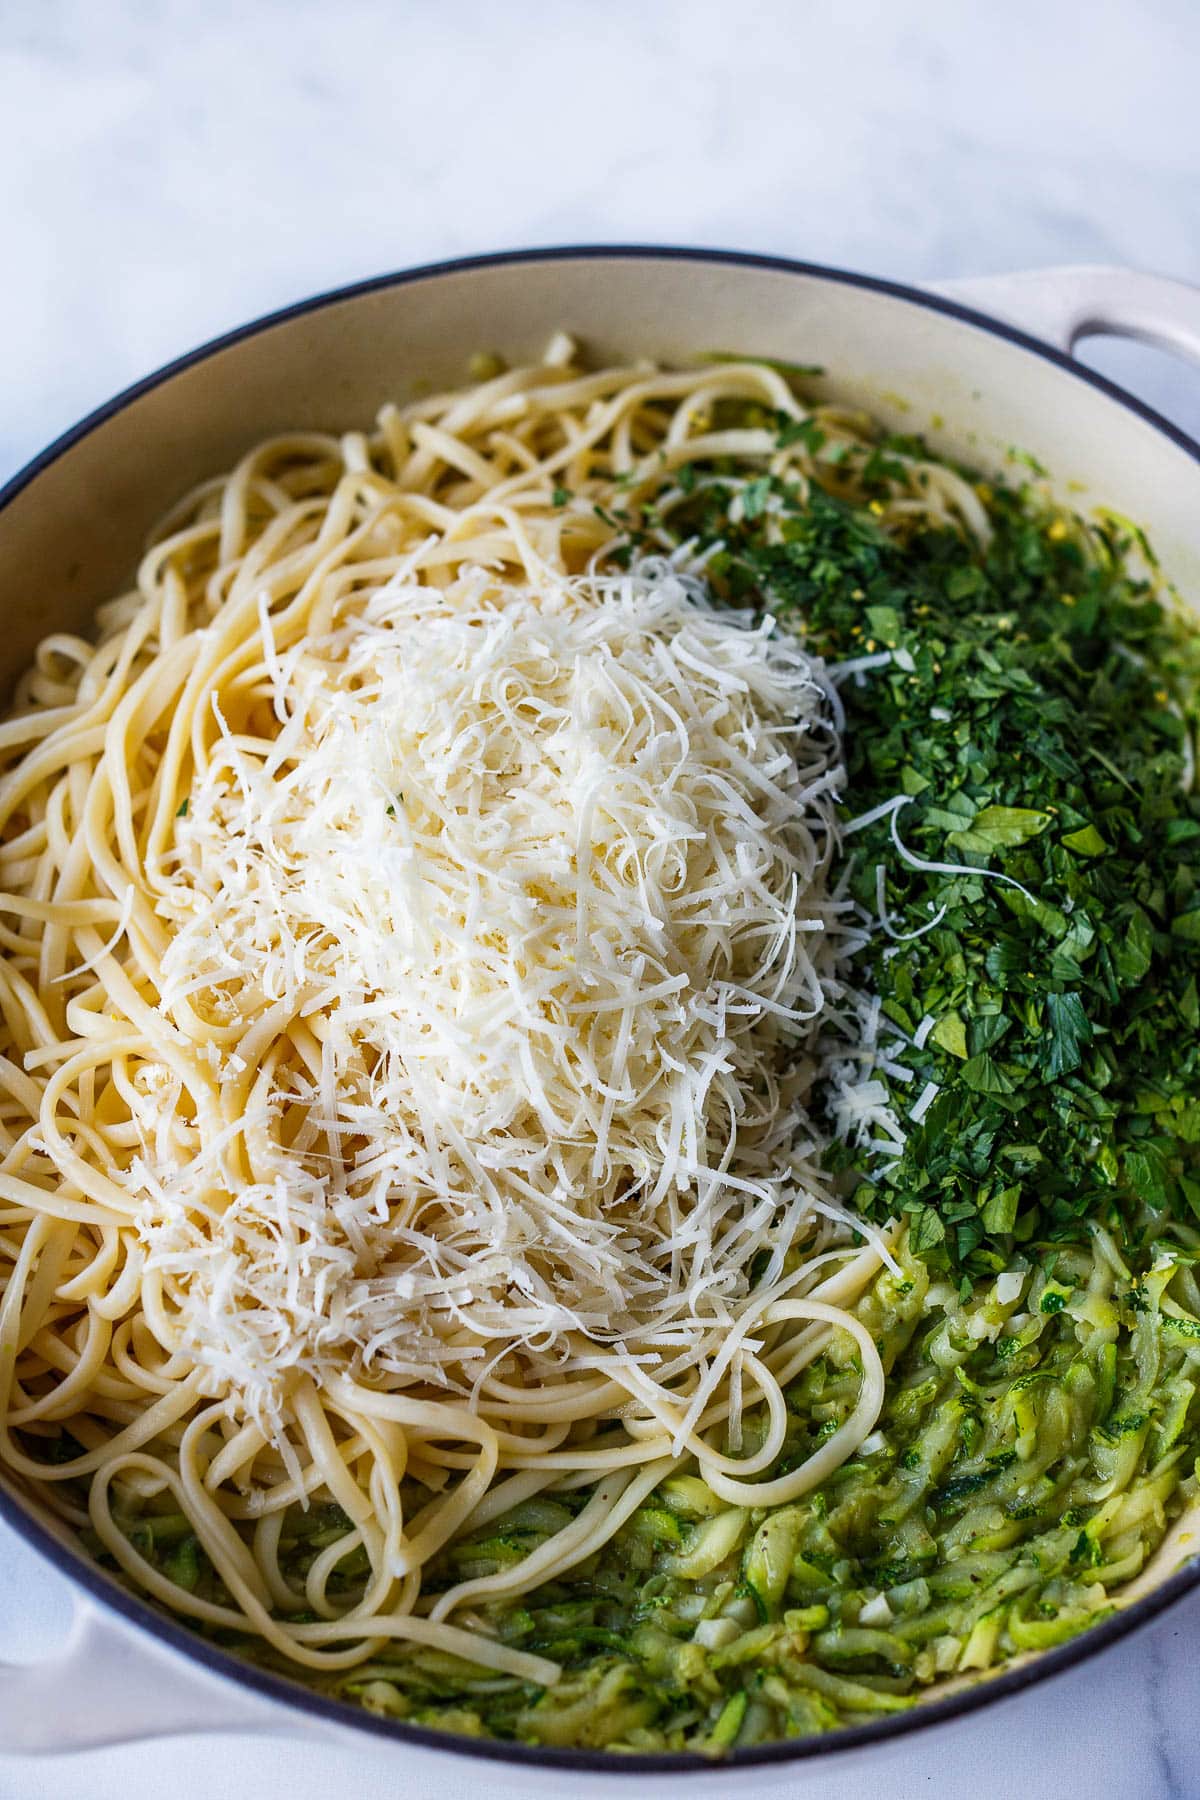 Tossing pasta, parmesan cheese, parsley and zucchini sauce.